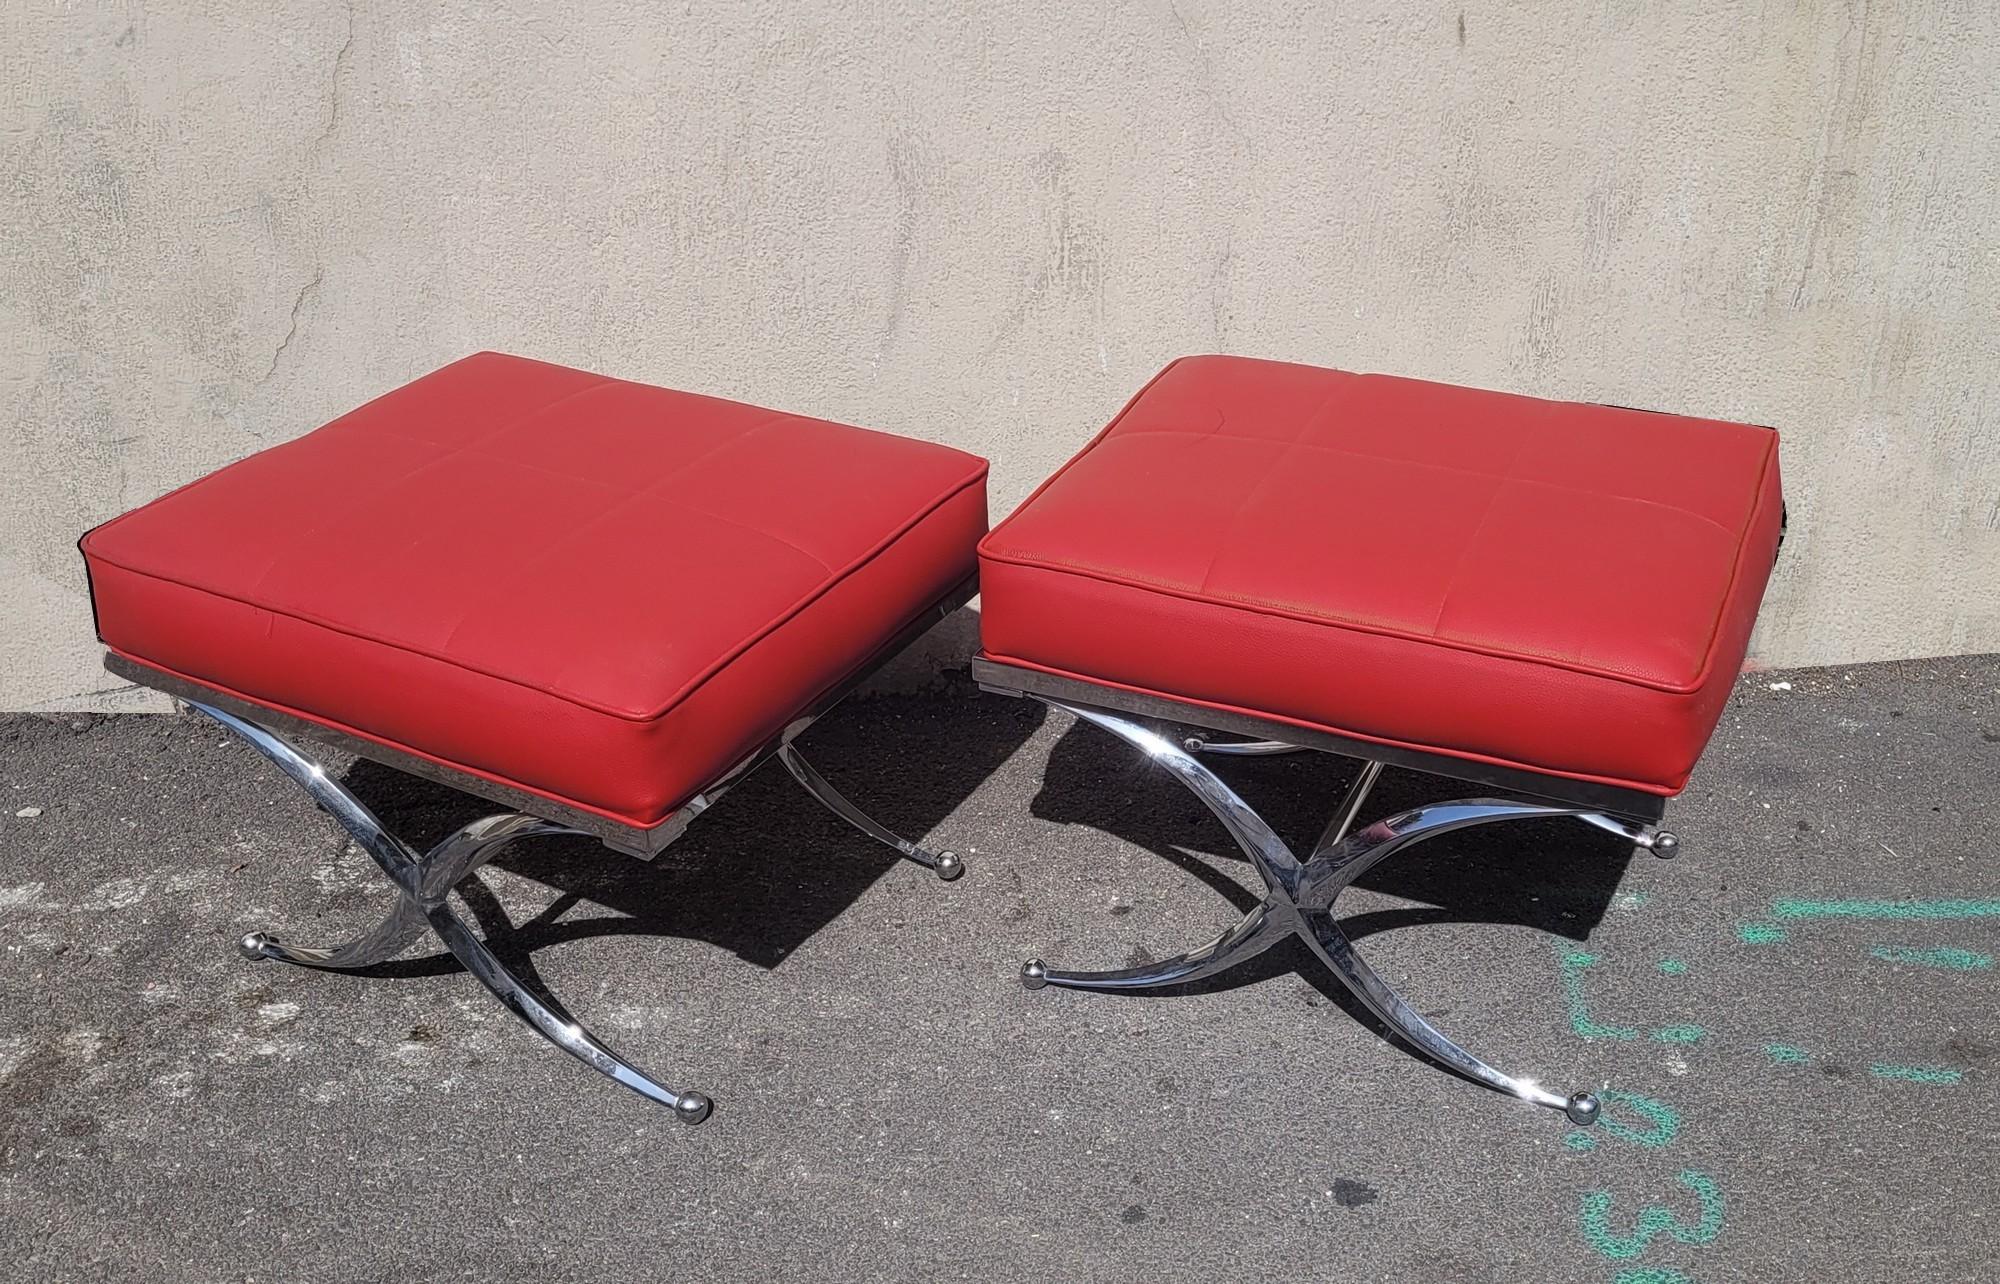 Pair of chrome X-shaped stools, with a seat in padded red imitation leather, ending in balls feet

Model attributed to Ralph Lauren

Good general condition, upholstery redone, slight wear and tear

Editions from the end of the 1980s

Height 48 cm
61